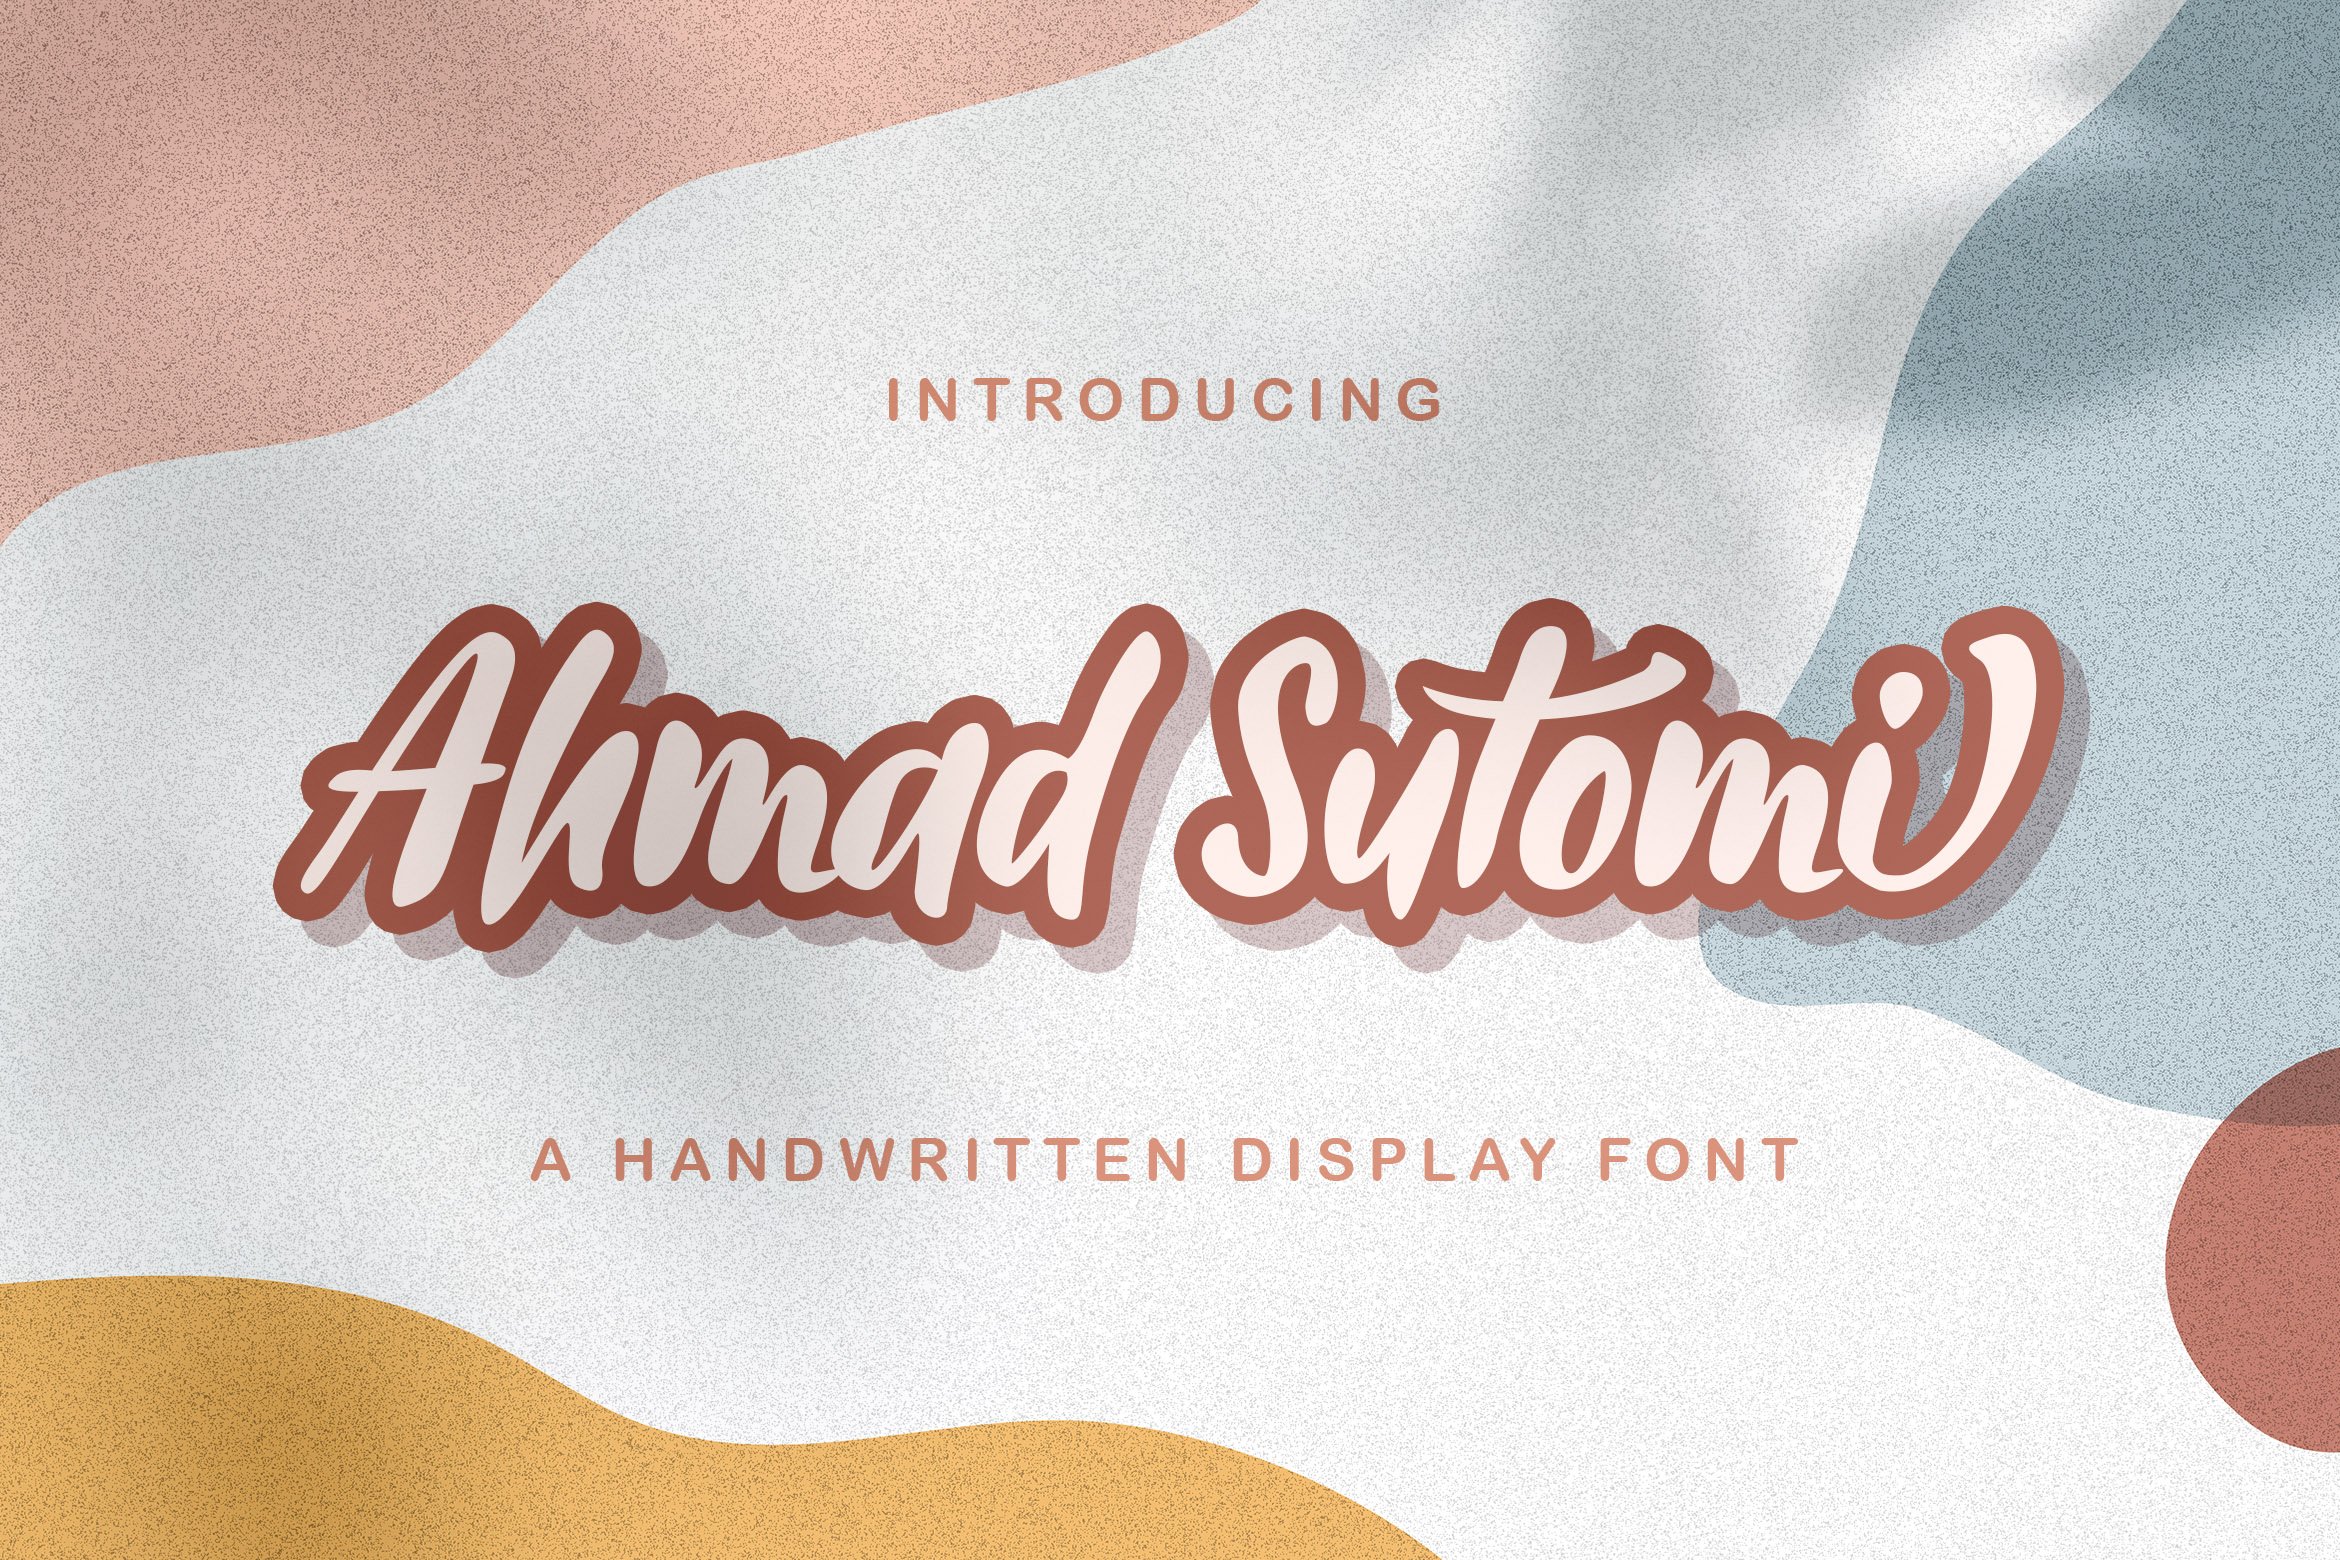 Ahmad Sutomi - Handwritten Font cover image.